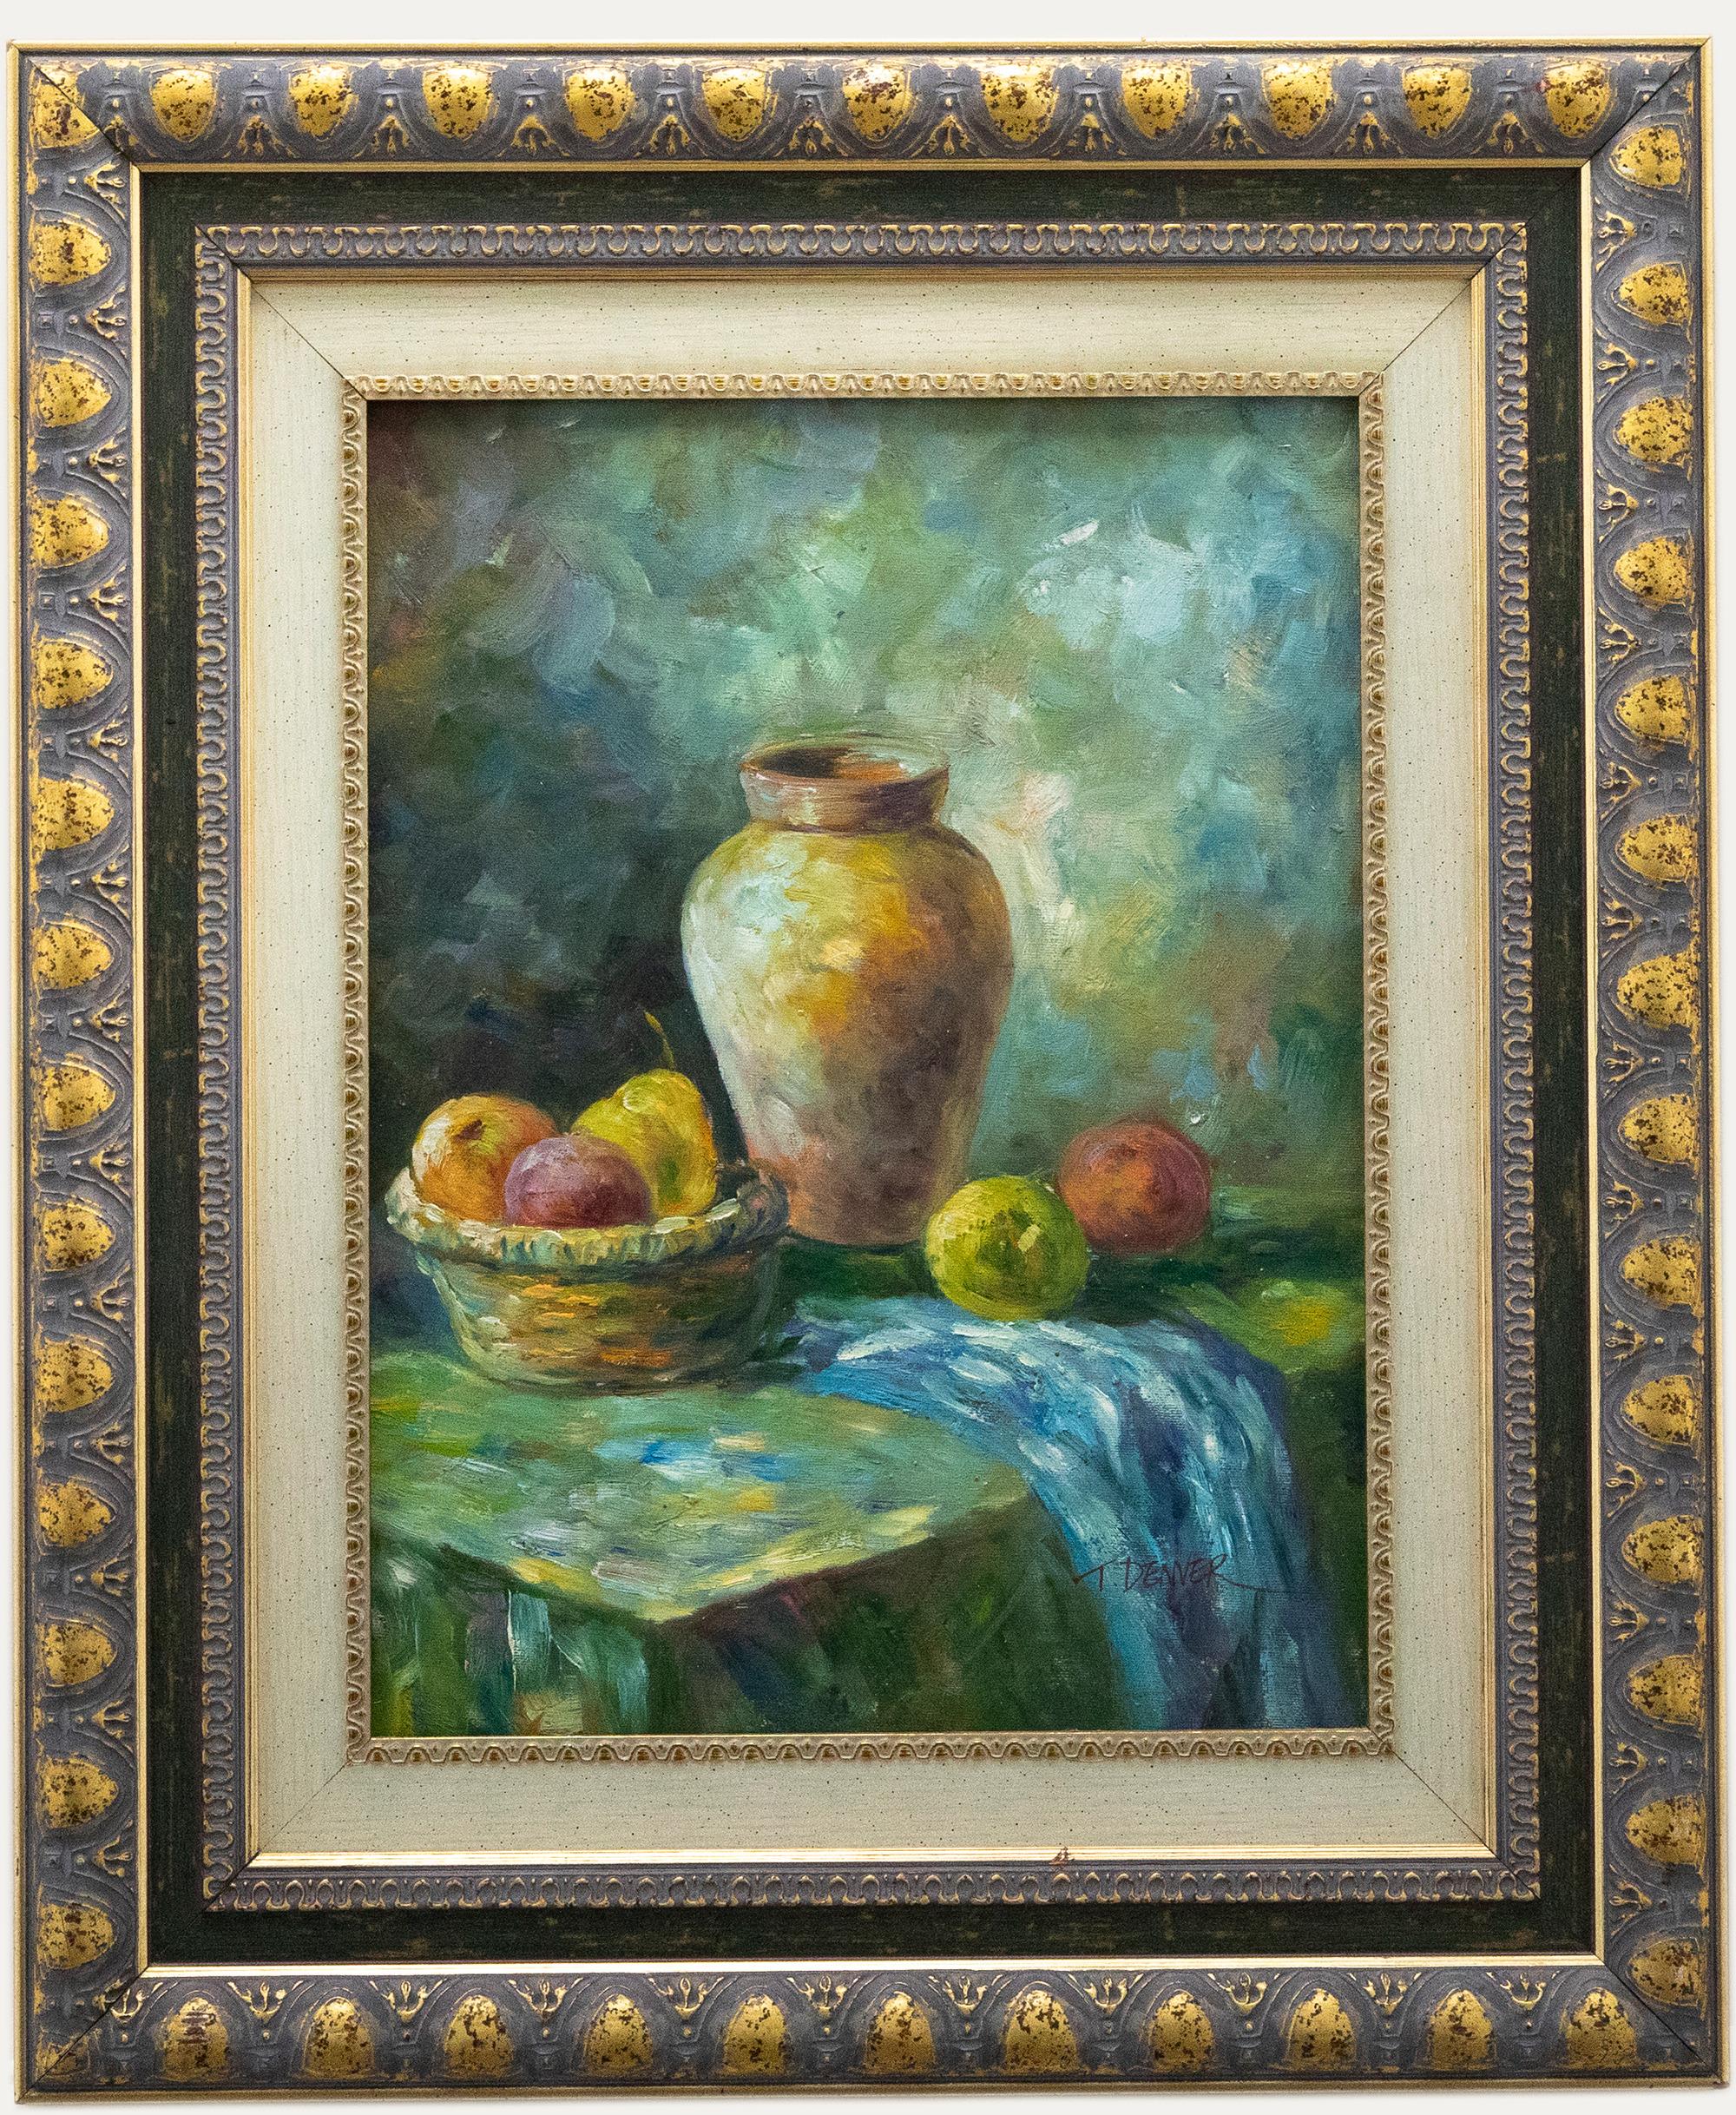 Unknown Still-Life Painting - T. Denver - 20th Century Oil, Fruit on Blue